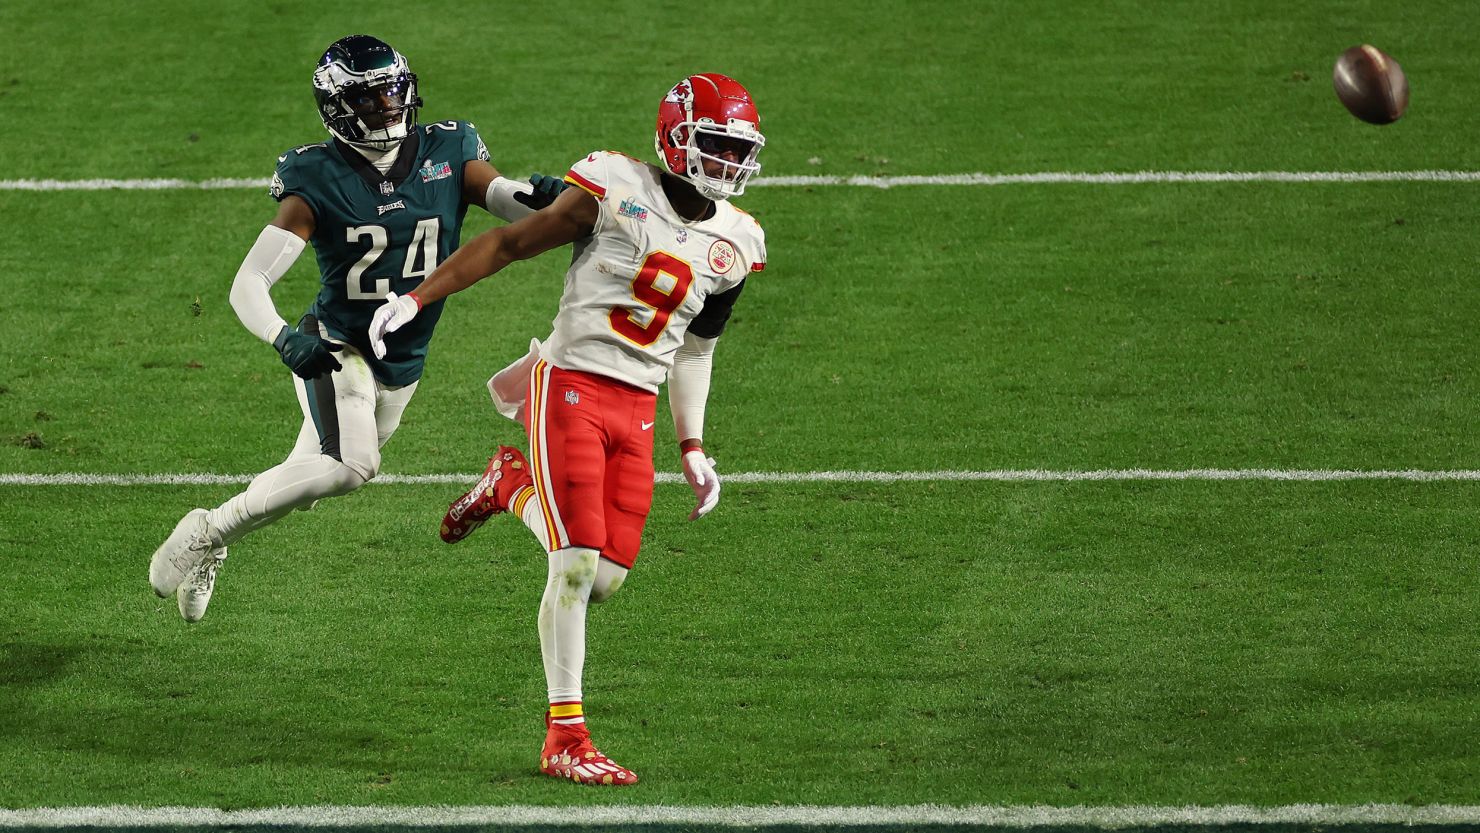 James Bradberry of the Philadelphia Eagles was called for holding Kansas City's JuJu Smith-Schuster late in the fourth quarter of Sunday's Super Bowl.